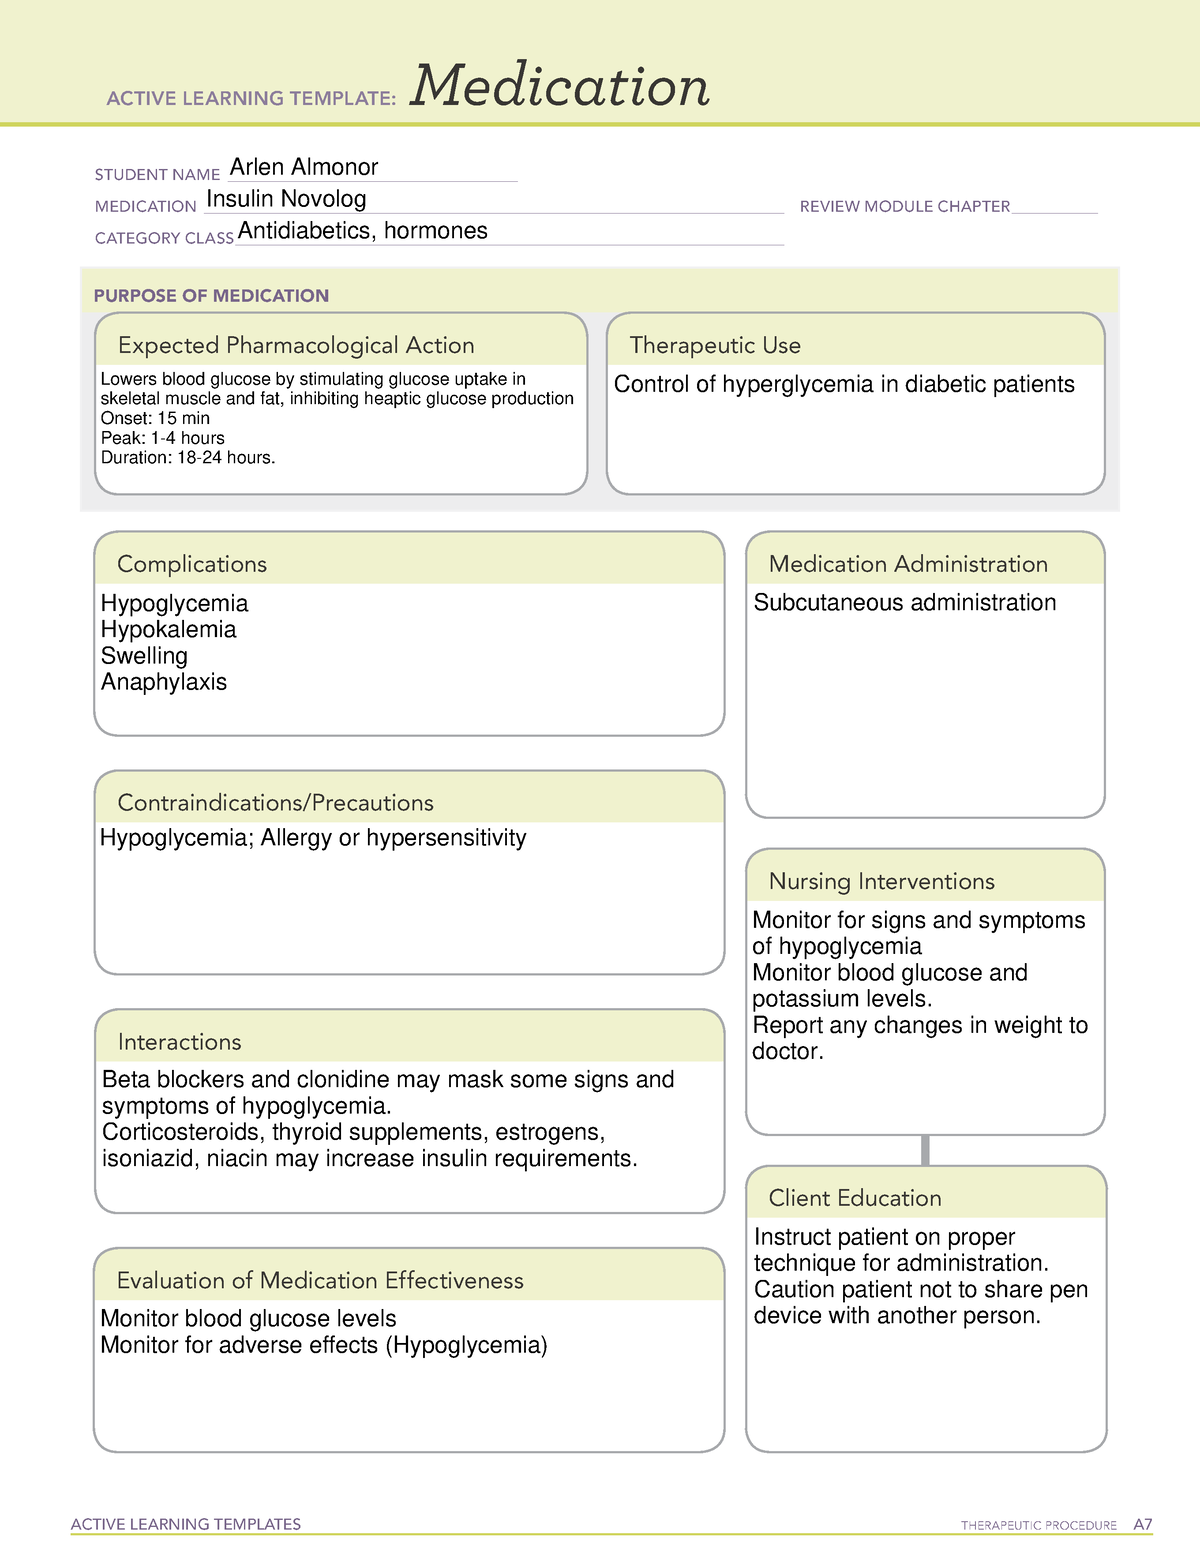 insulin-novolog-ati-med-card-active-learning-templates-therapeutic-procedure-a-medication